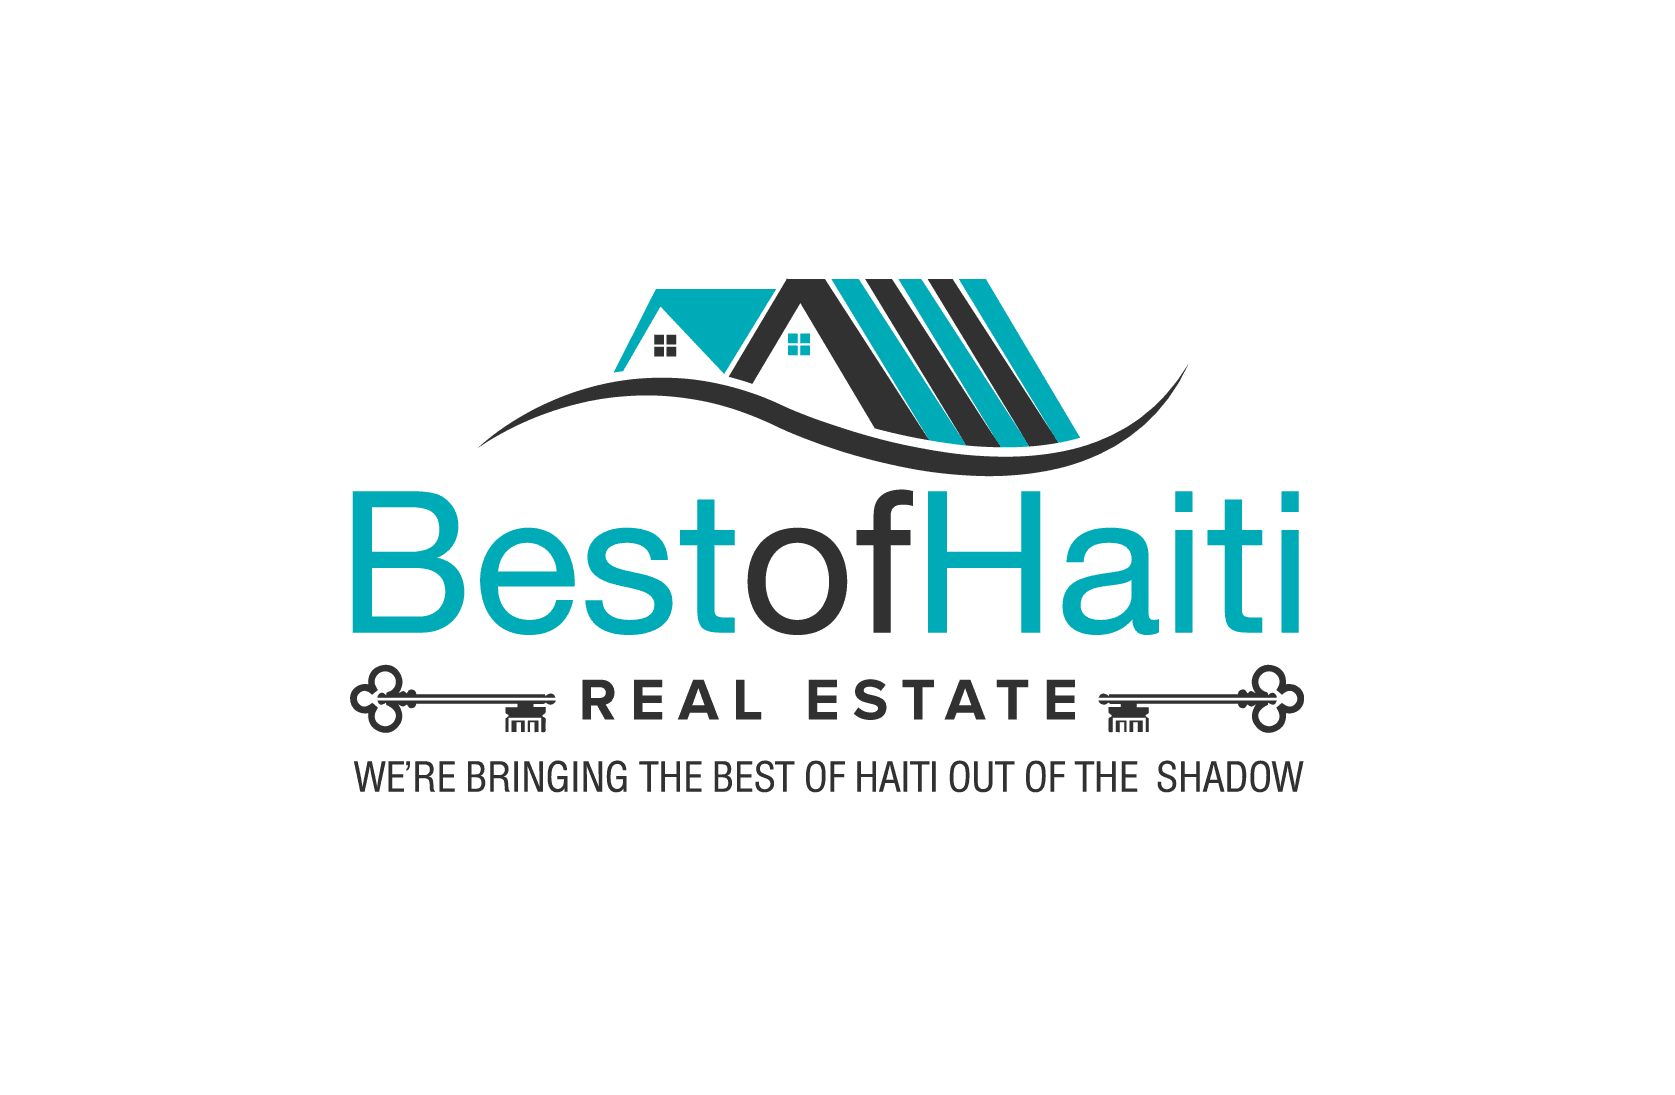 Splendid, Secure Area, 2 Bedrooms, 2 Baths, Fully Furnished House for Rent at Puits Blain 4, Petion Ville, Haiti